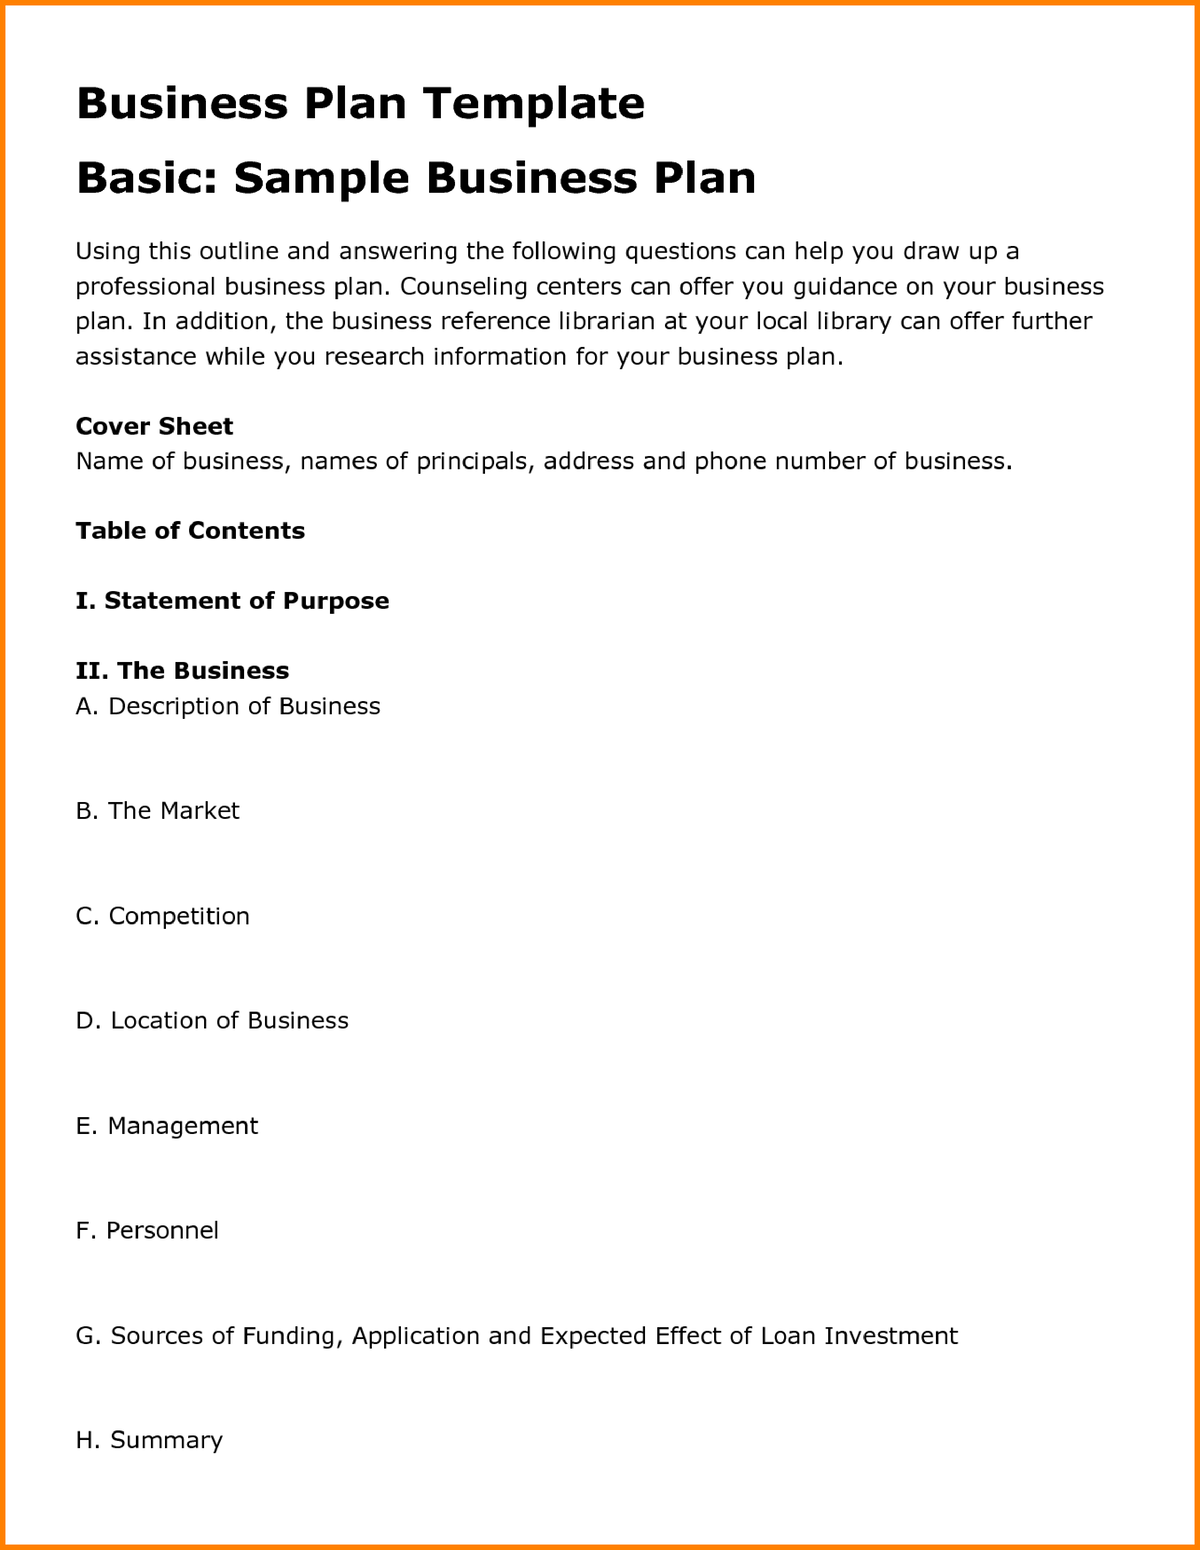 business plan for an engineering company